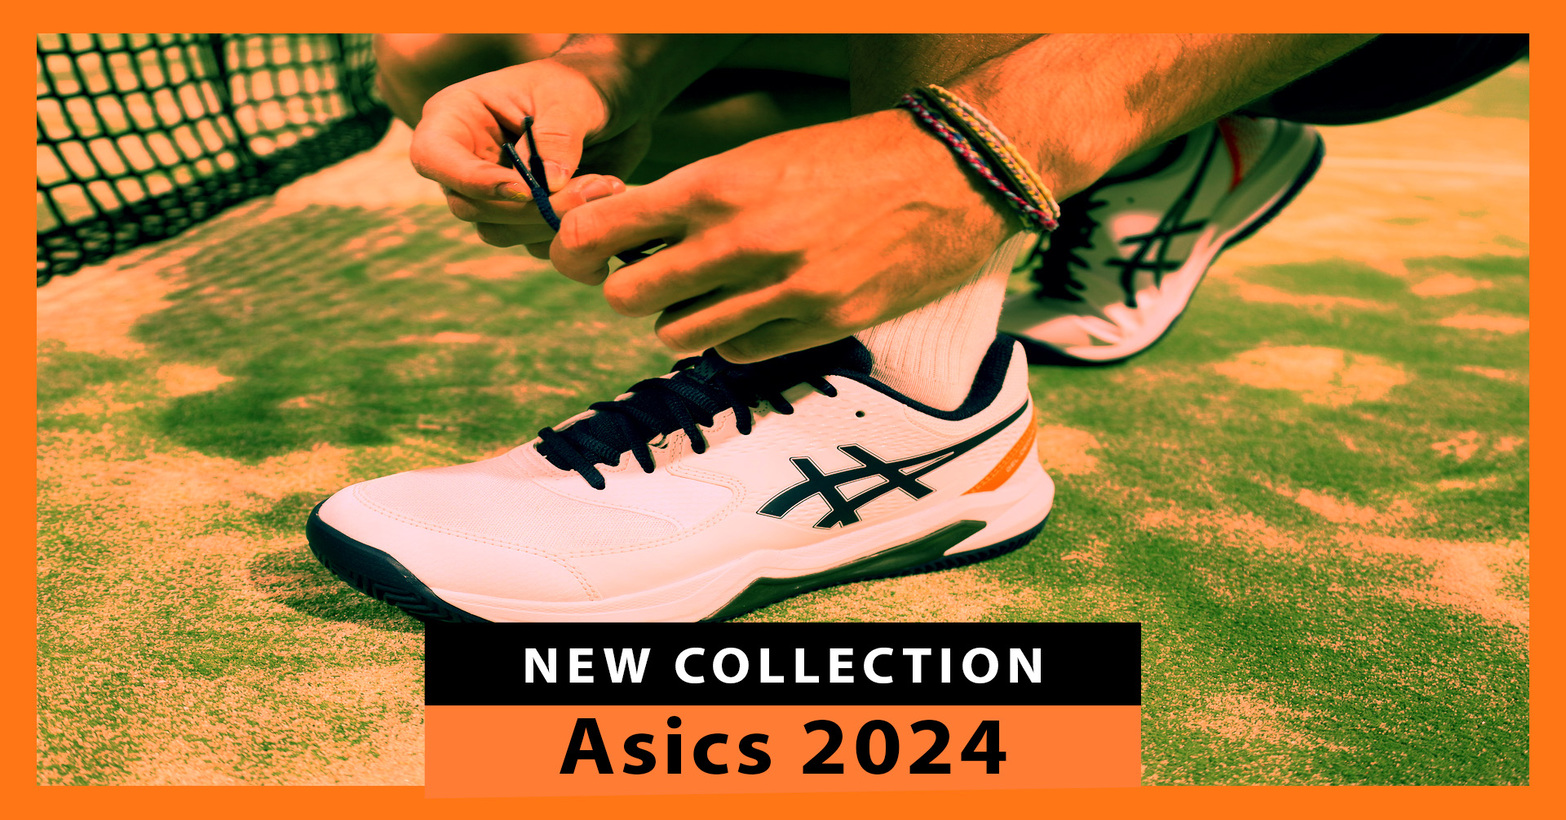 New Asics 2024 Padel Shoes Collection: Class and Comfort for the 20x10 Court